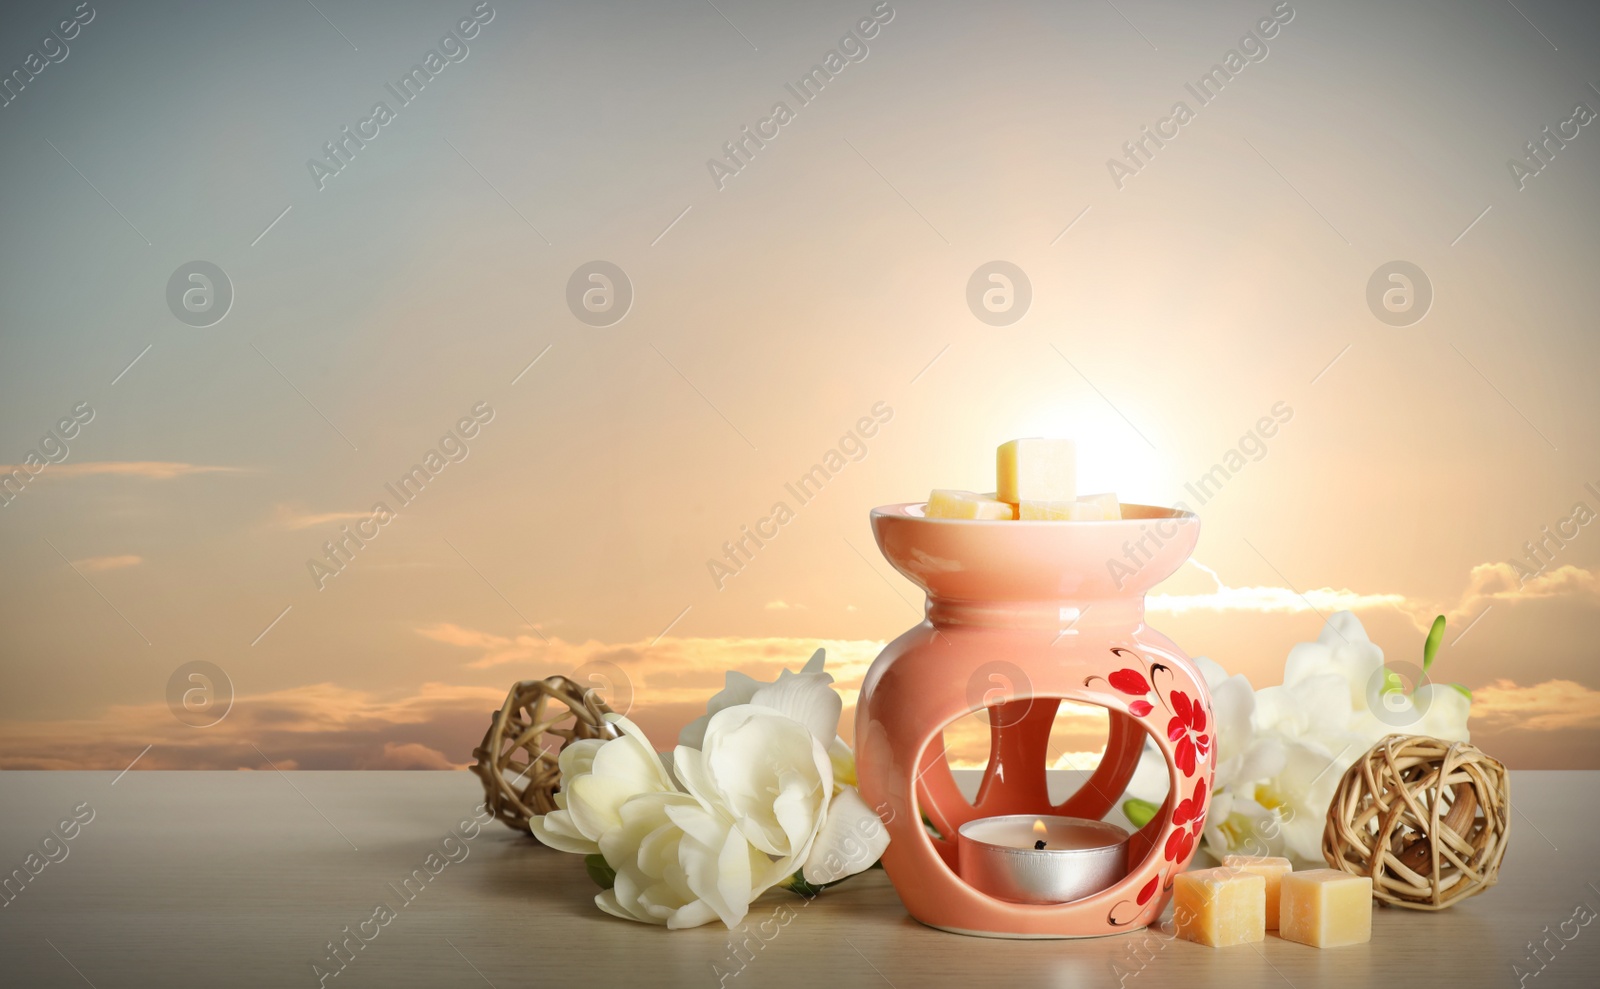 Image of Composition with aroma lamp on wooden table outdoors at sunset, space for text